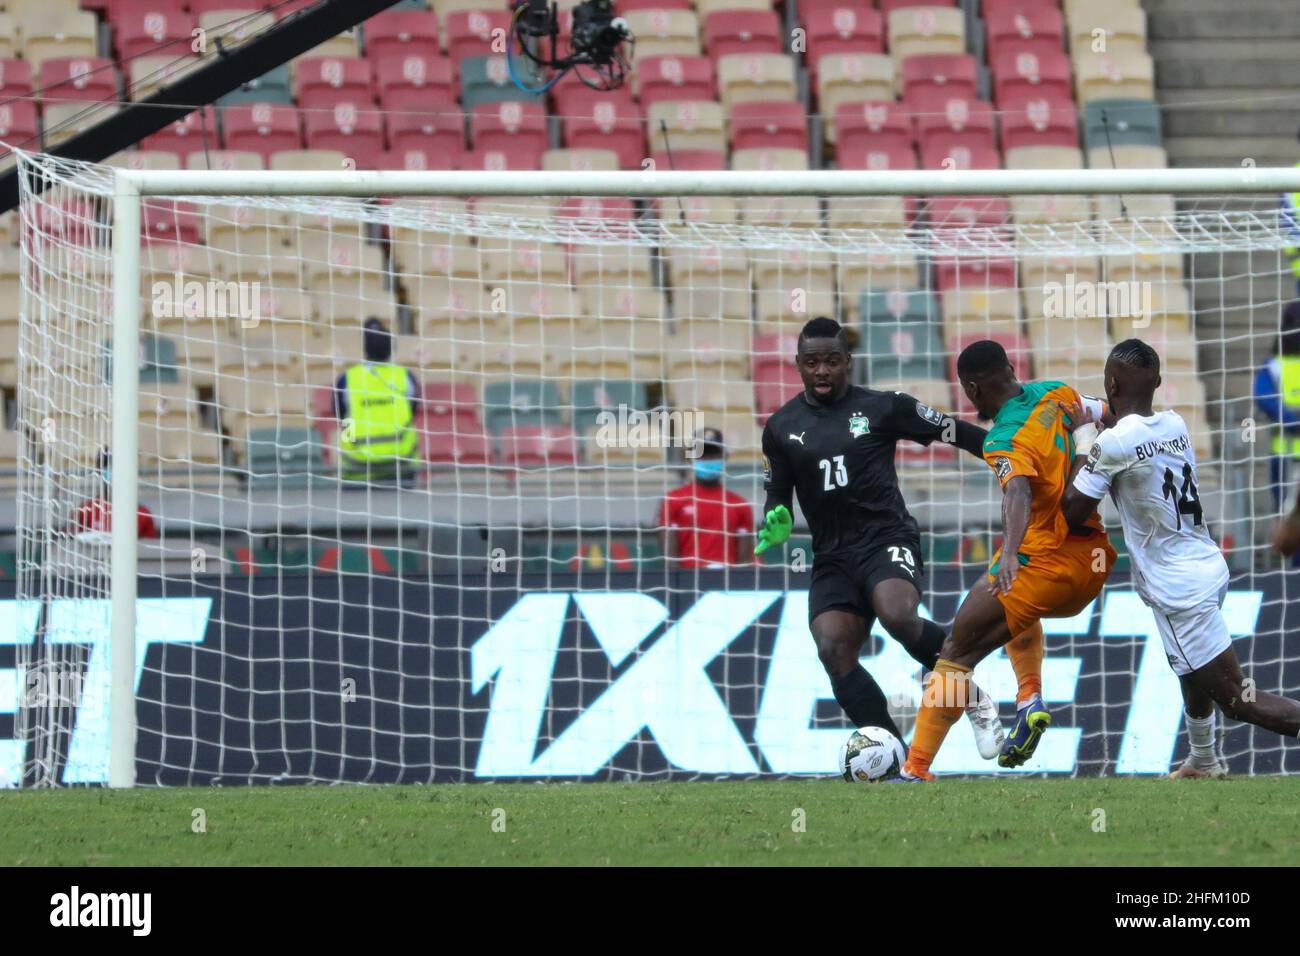 Douala, CAMEROON - JANUARY 16: goalkeeper Badra Ali Sangare, Serge Aurier of Ivory Coast in action during the Africa Cup of Nations group E match between Ivory Coast and Sierra Leone at Stade de Japoma on January 16 2022 in Douala, Cameroon. (Photo by SF) Credit: Sebo47/Alamy Live News Stock Photo